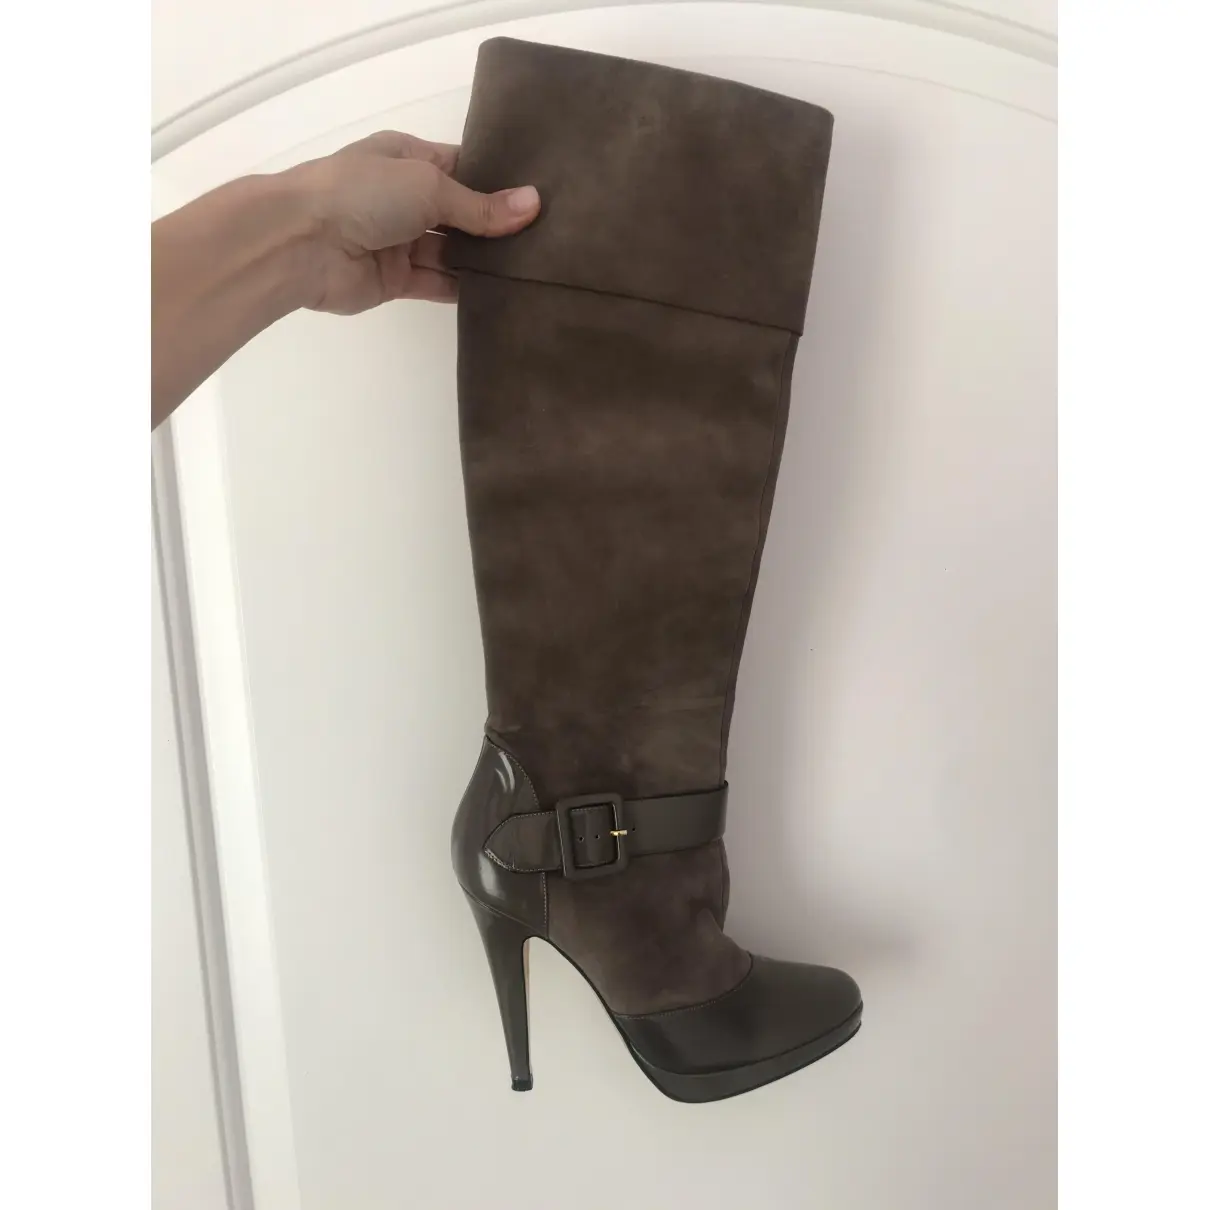 Barbara Bui Boots for sale